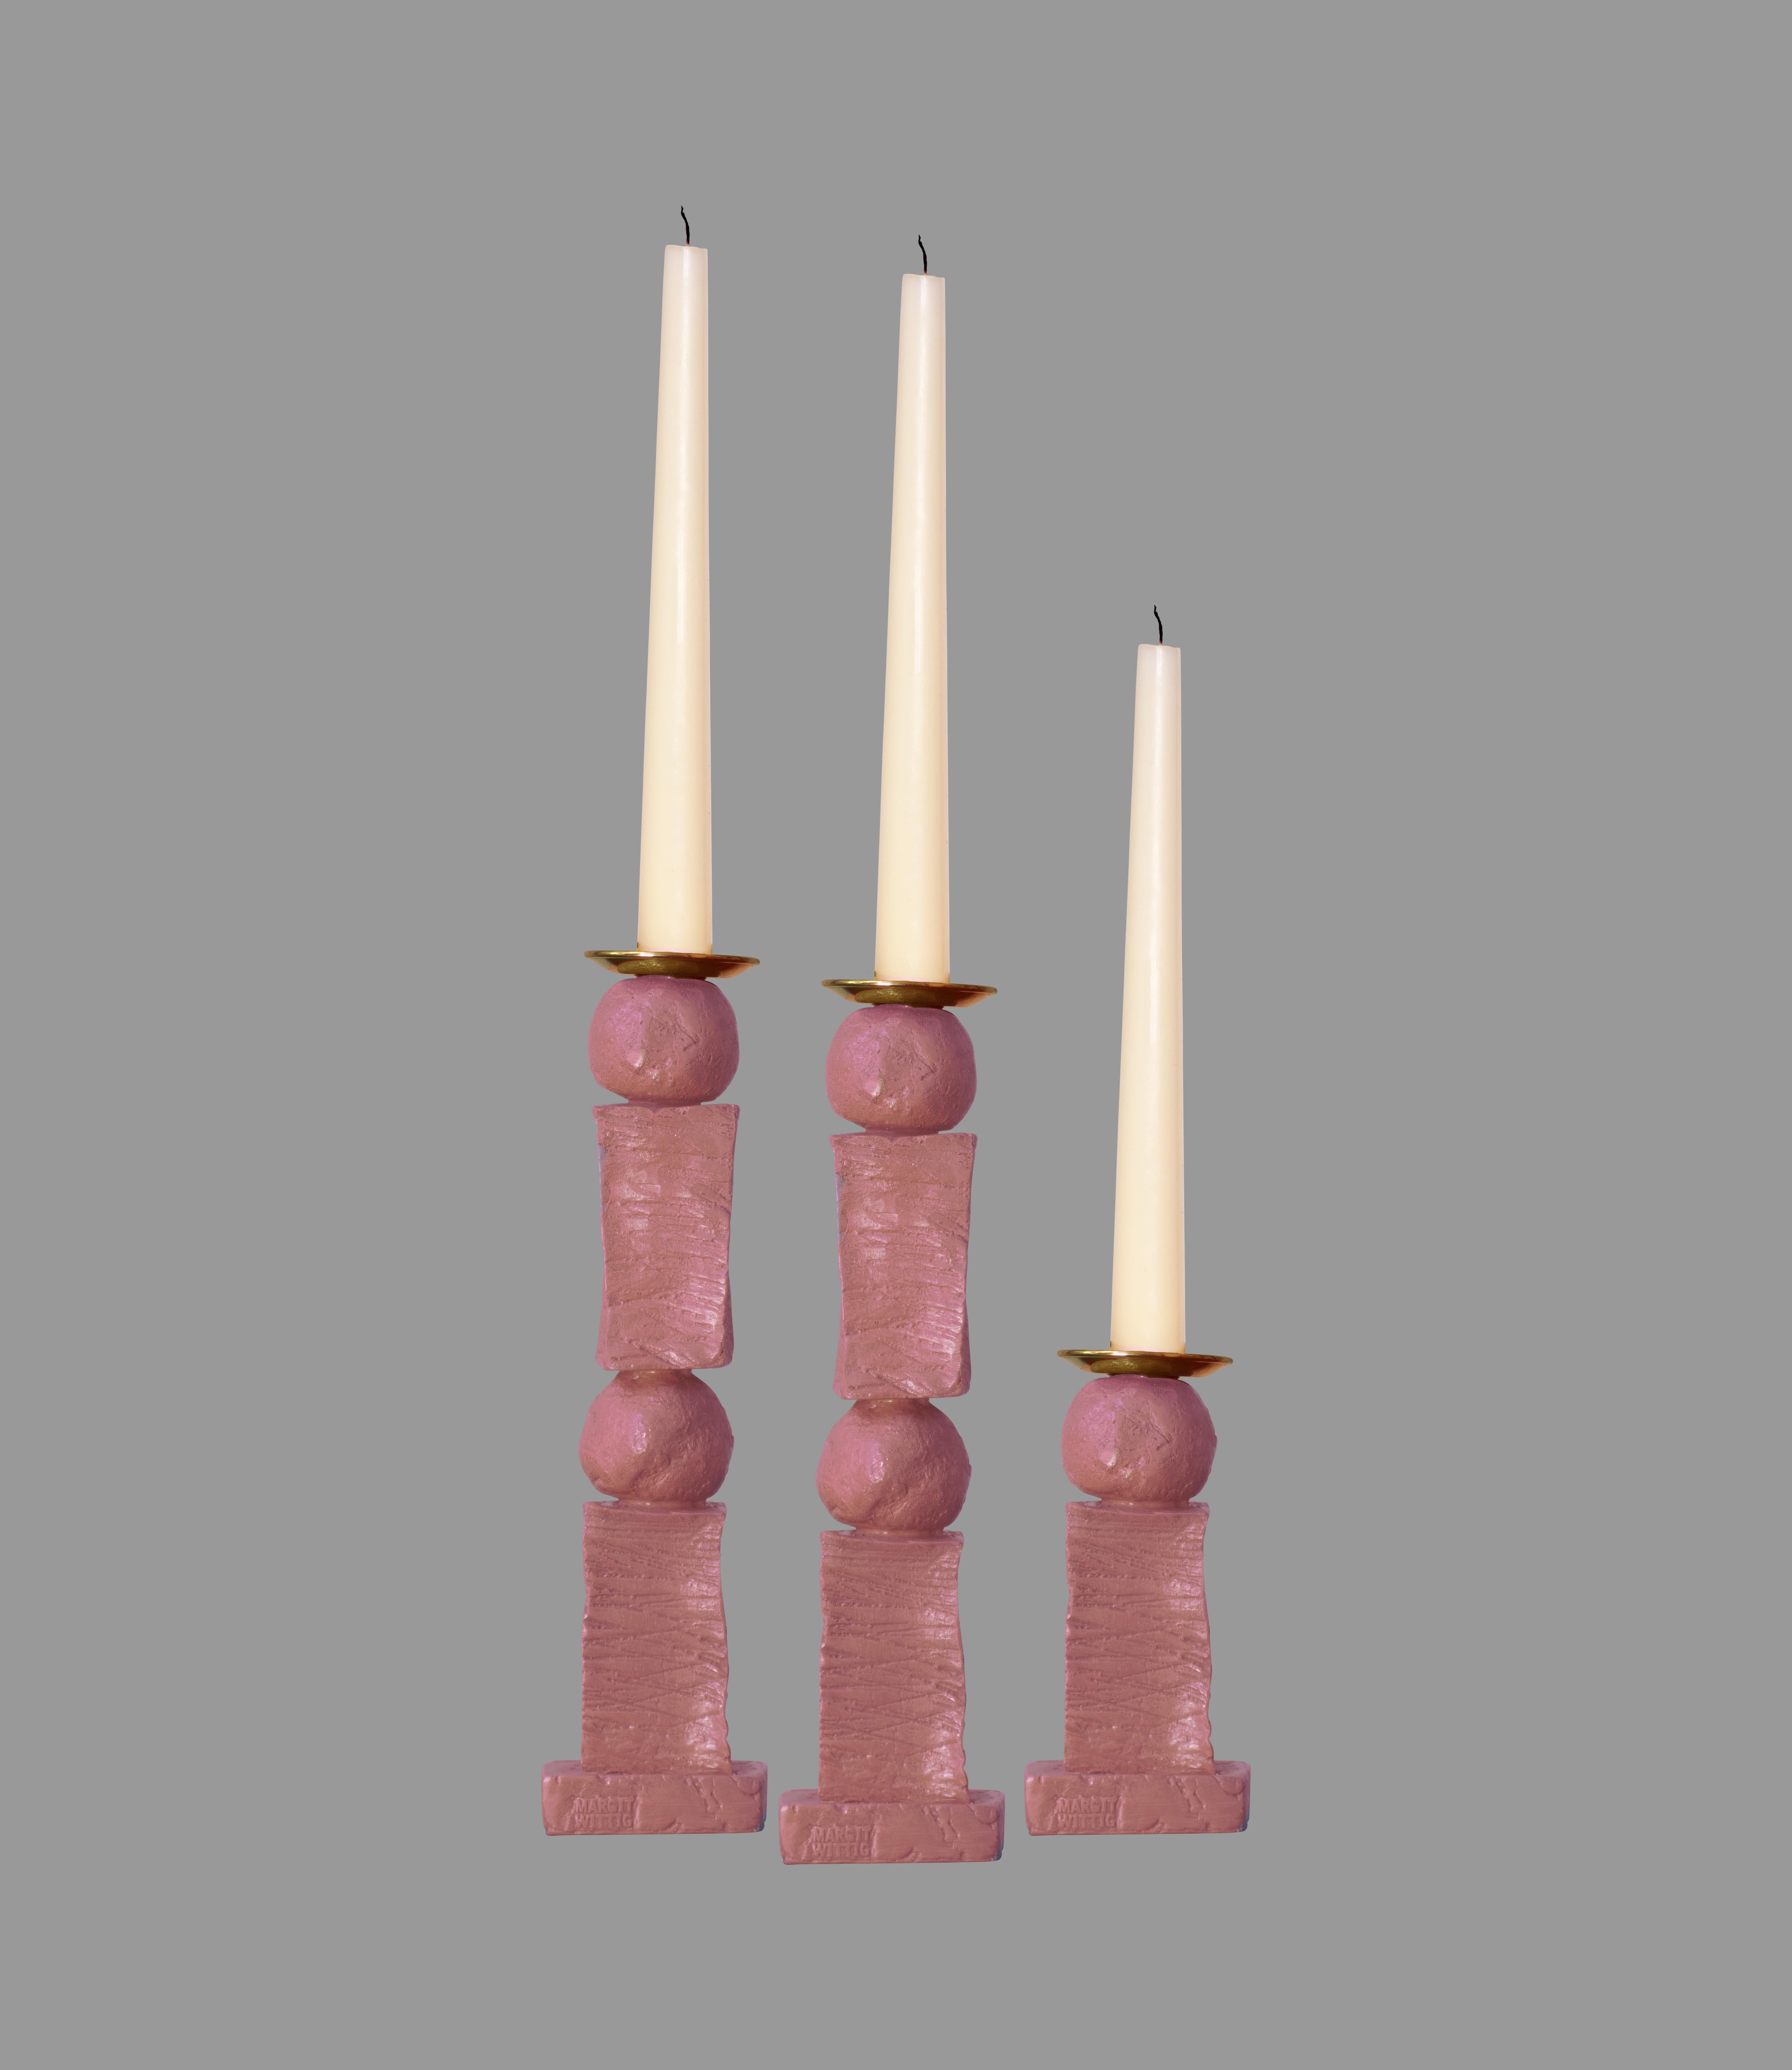 UK customers please note: displayed prices do not include VAT.

Margit Wittig has used her sculptural skills to create beautifully-crafted, well-proportioned candlesticks, which are compositions of her unique signature pearl-shaped